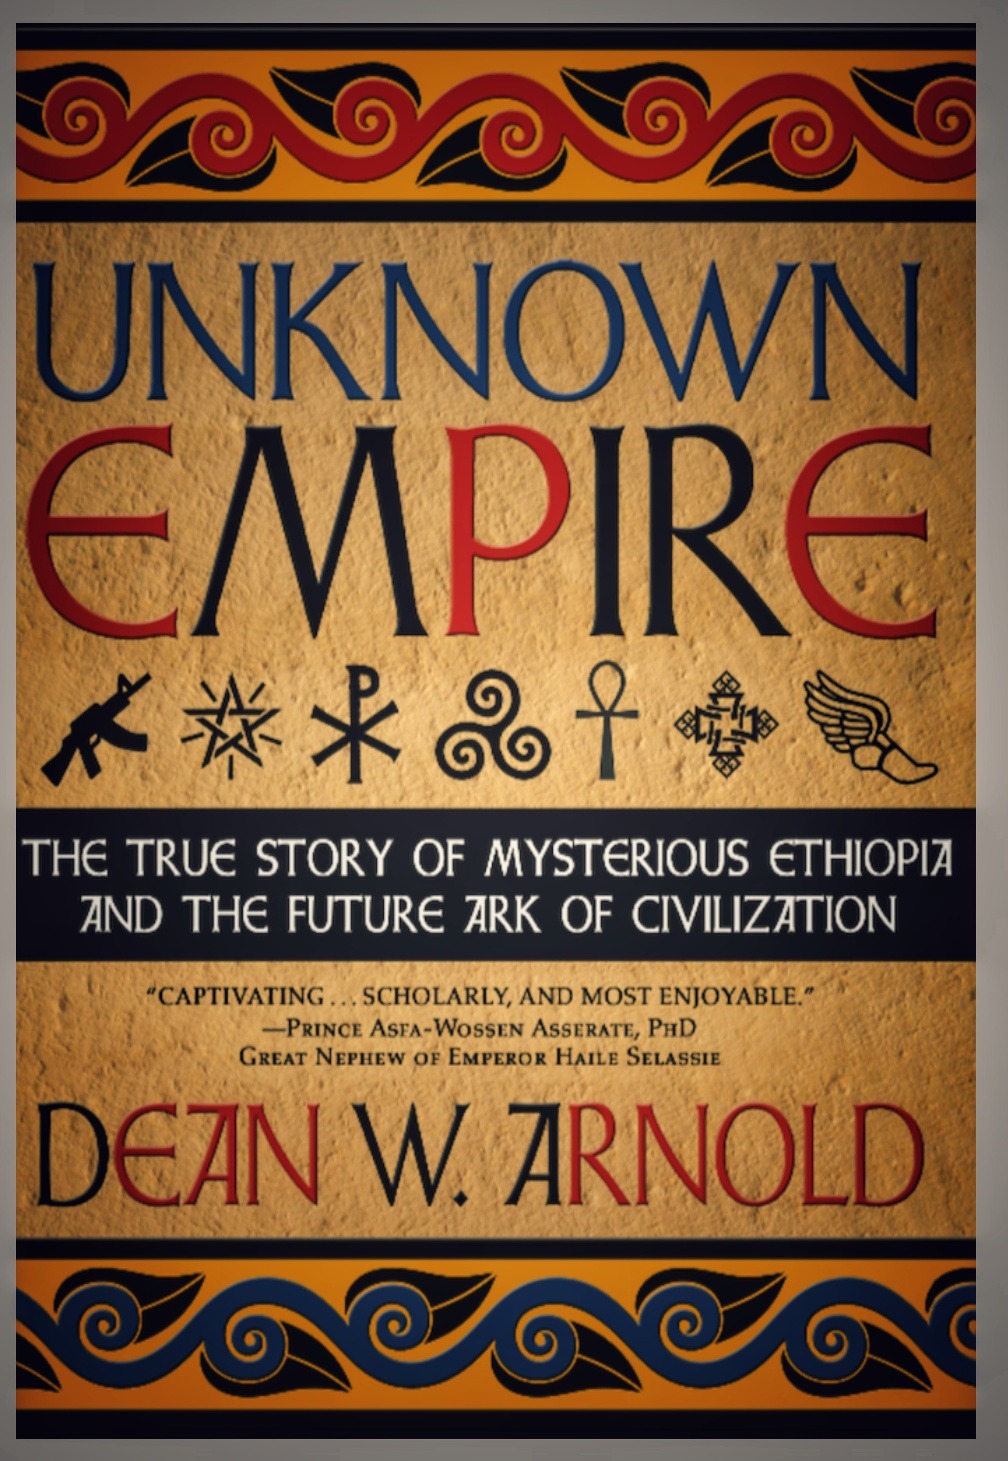 New Book – The Mysterious Empire of Ethiopia